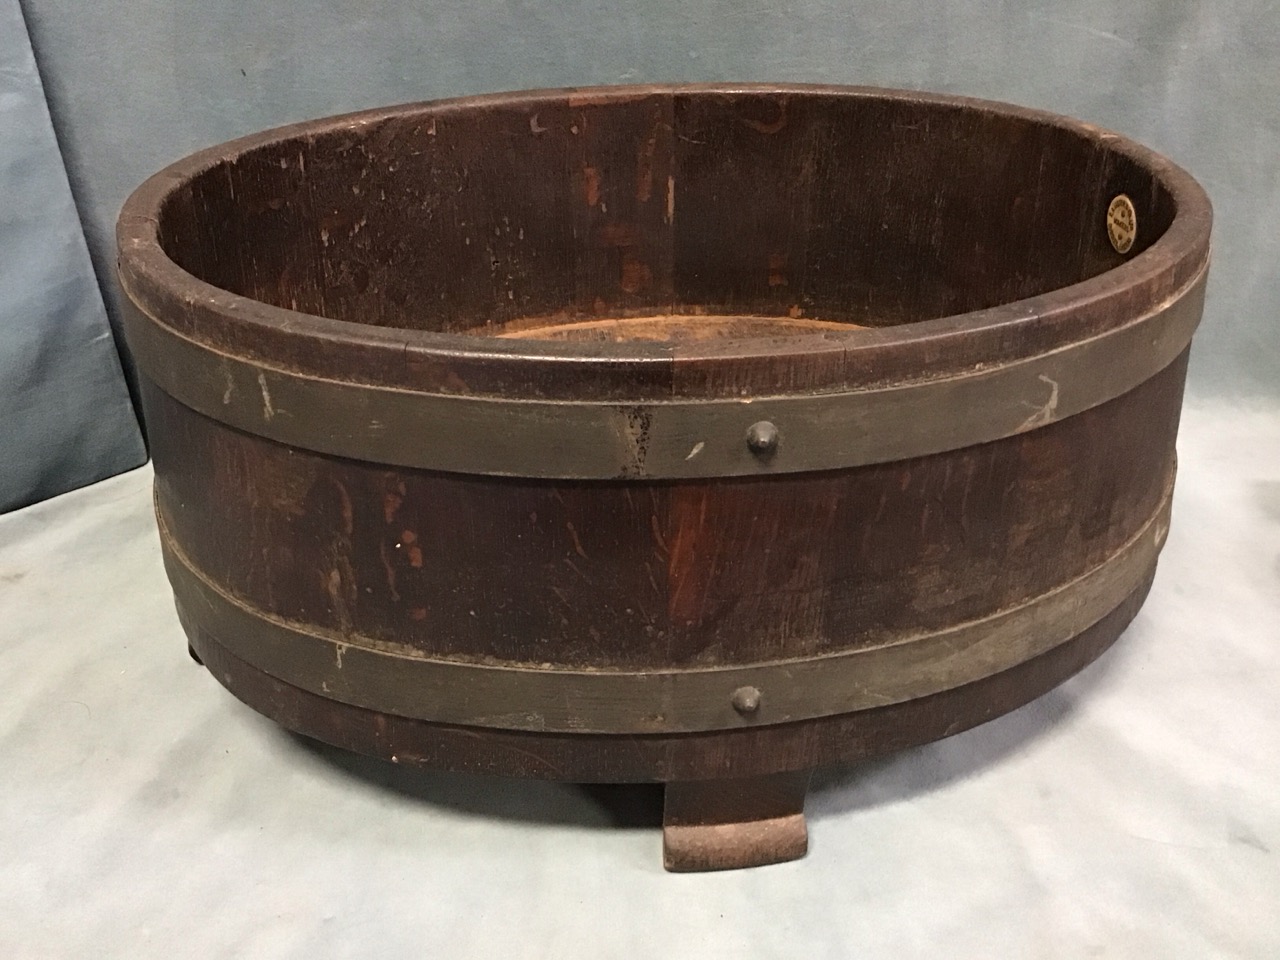 An Edwardian oval coopered oak jardiniere with copper bands, raised on shaped stile feet, by RA